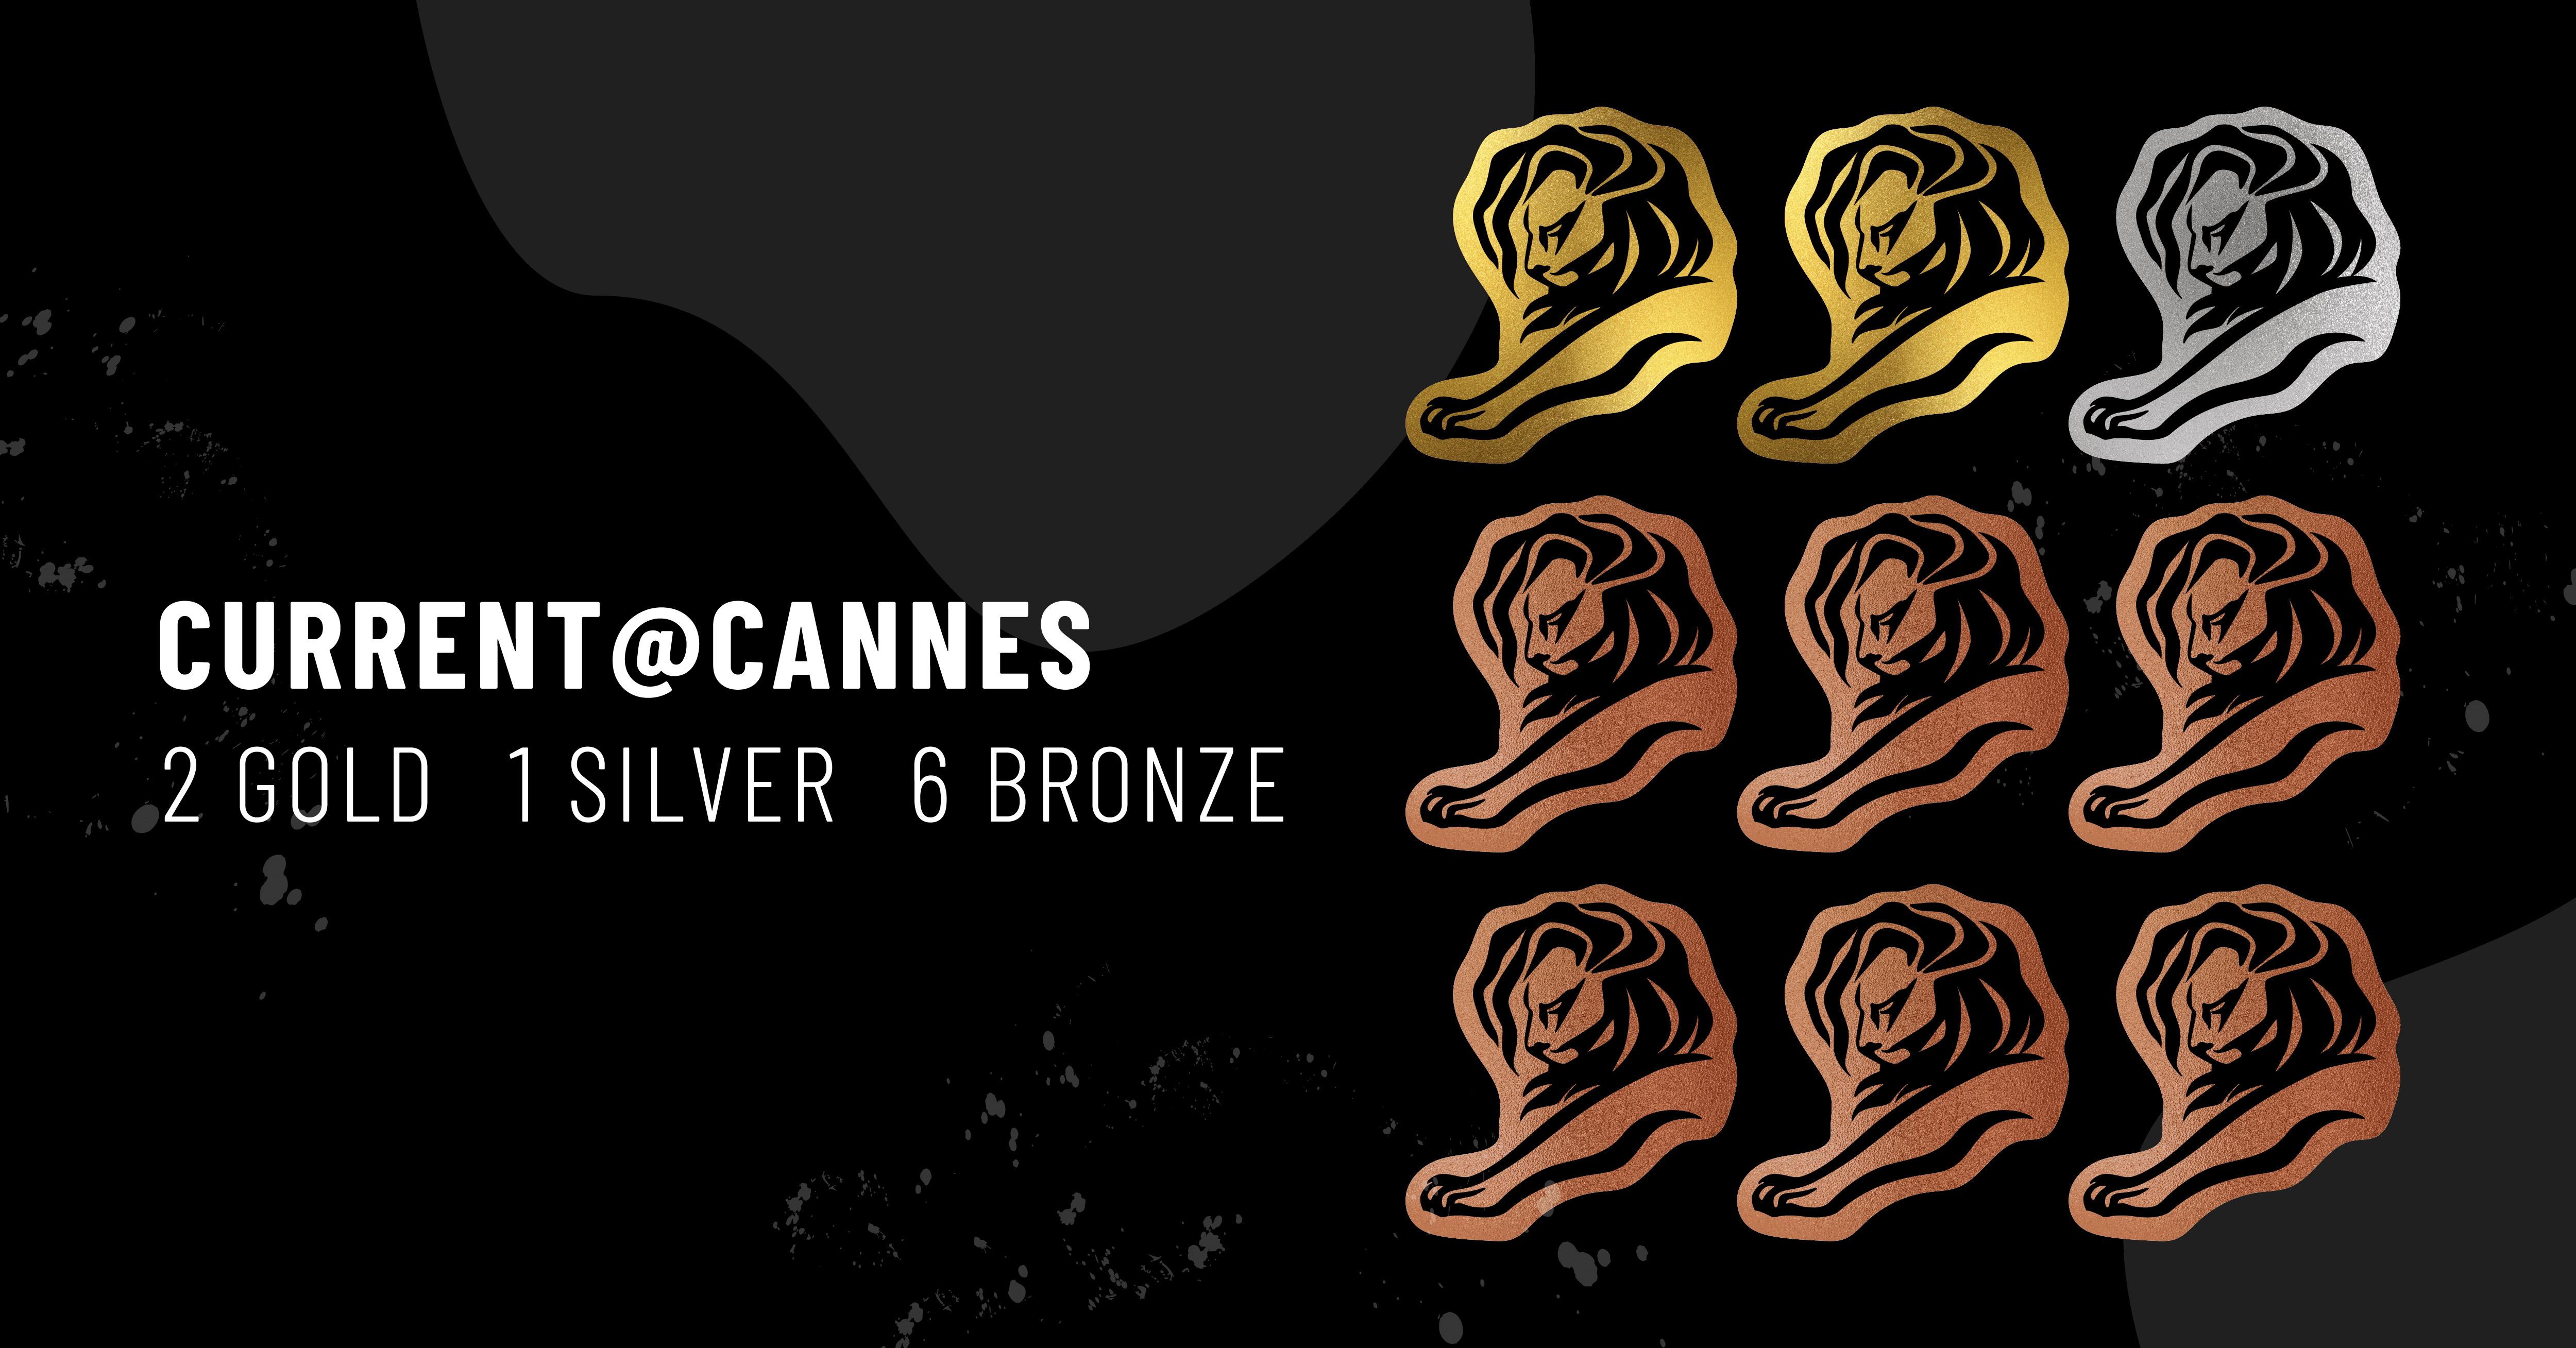 The image showcases 9 Cannes Lions icon with text that reads: Current @ Cannes - 2 Gold, 1 Silver, 6 Bronze.